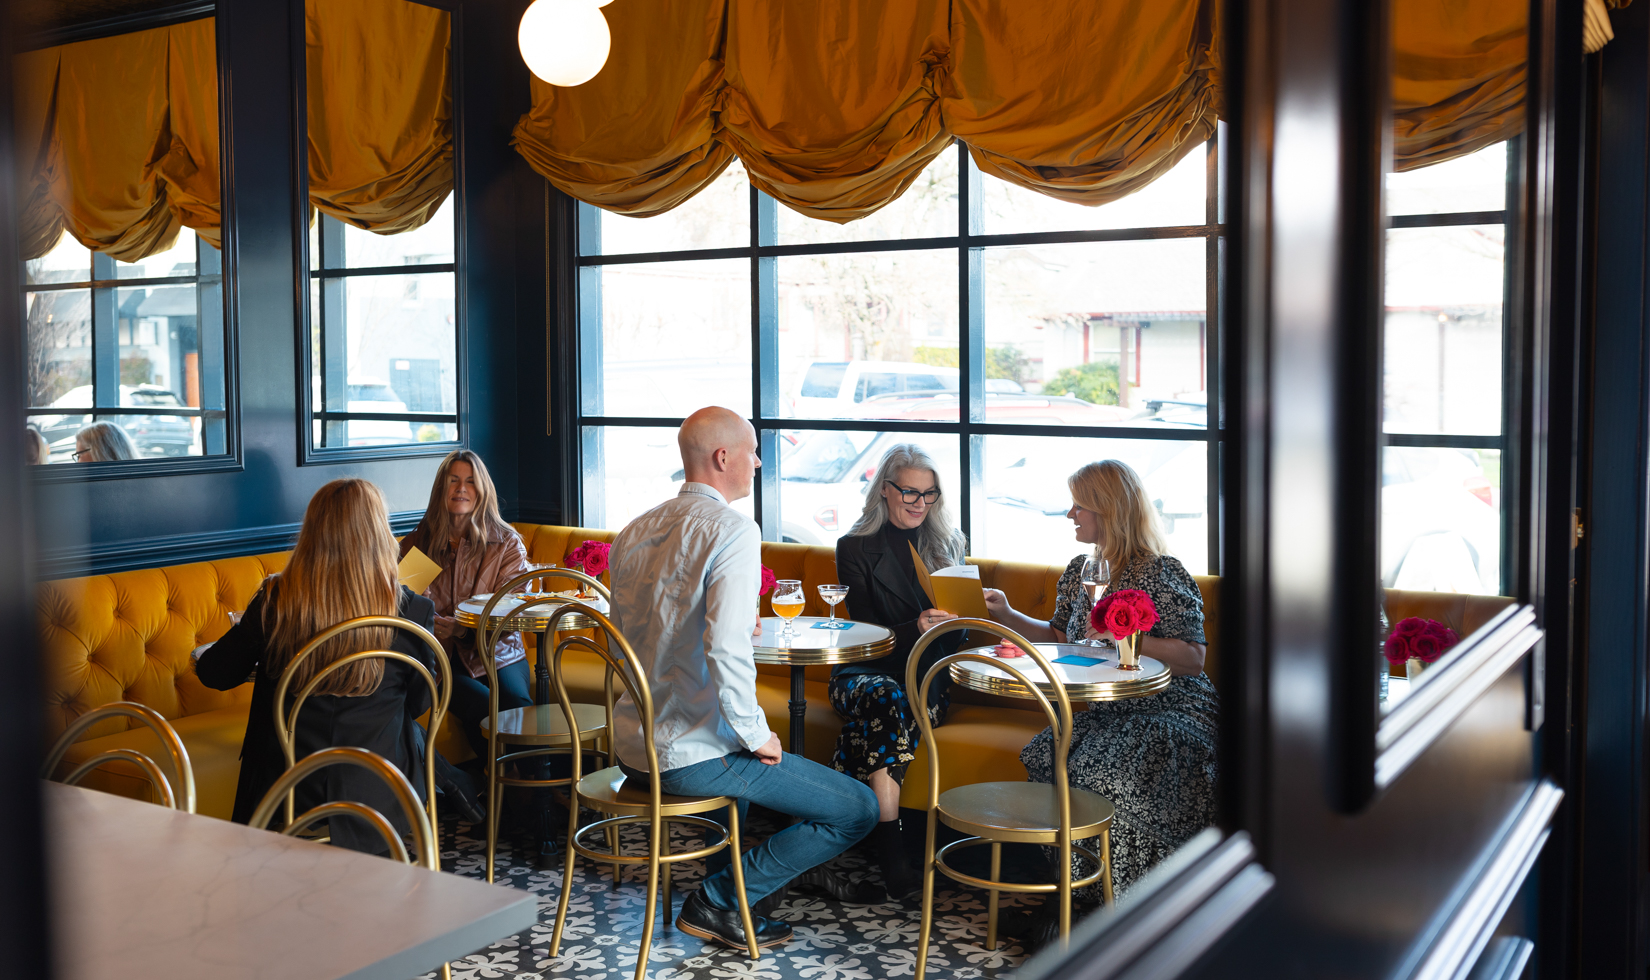 group of guests sitting in french-inspired restaurant with yellow drapes and bistro-style seating